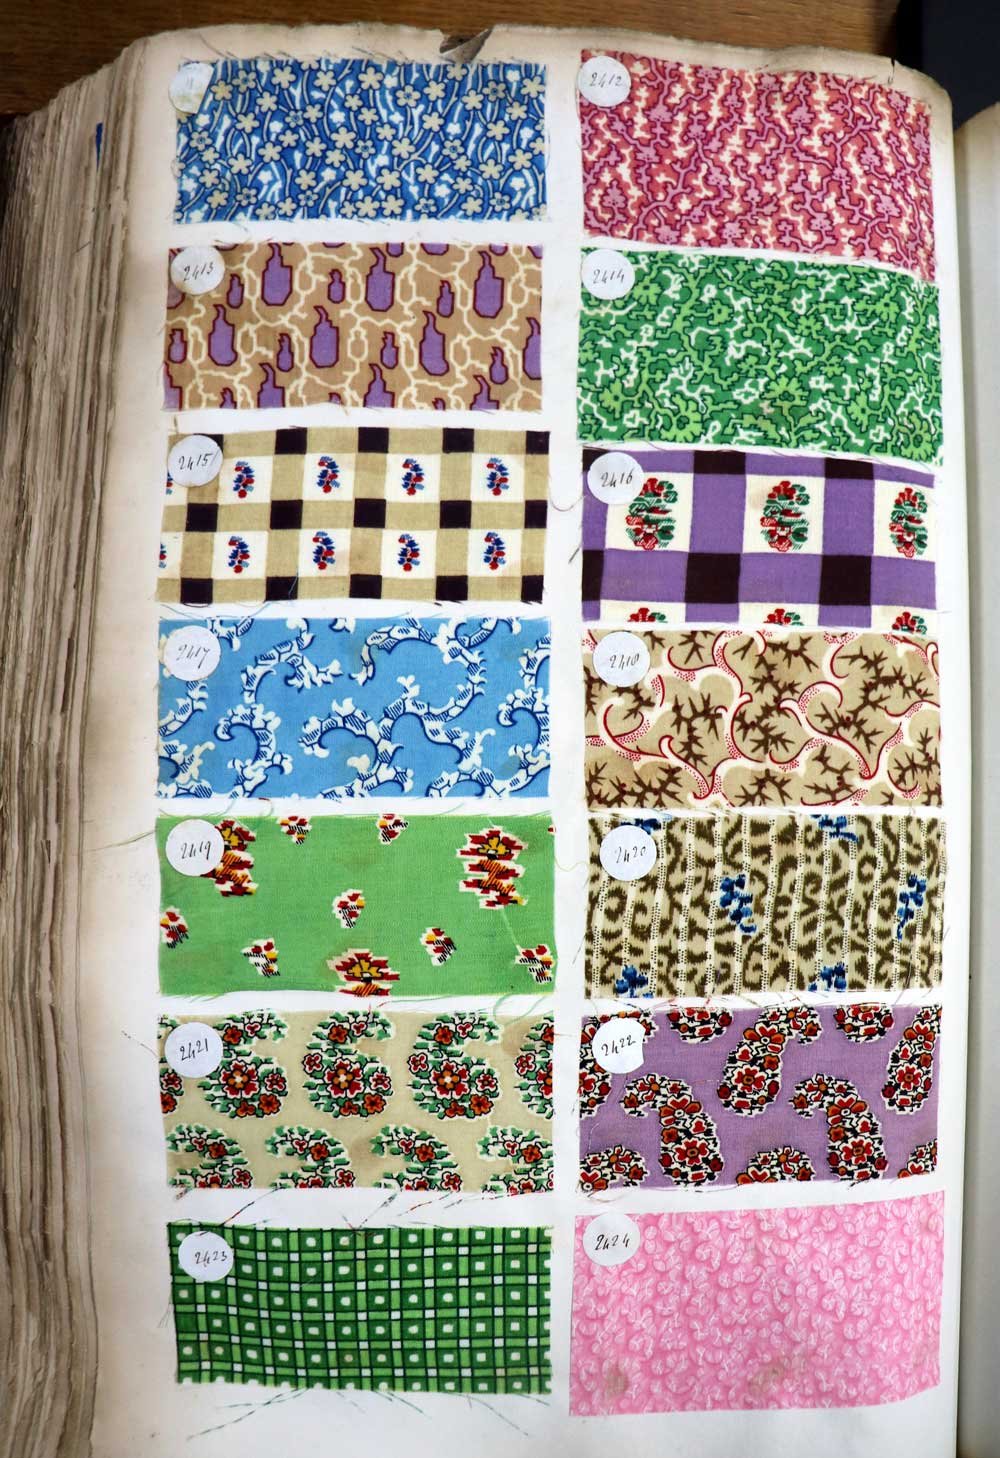 Fourteen small, rectangular patches of textiles showing very different colourful patterns.